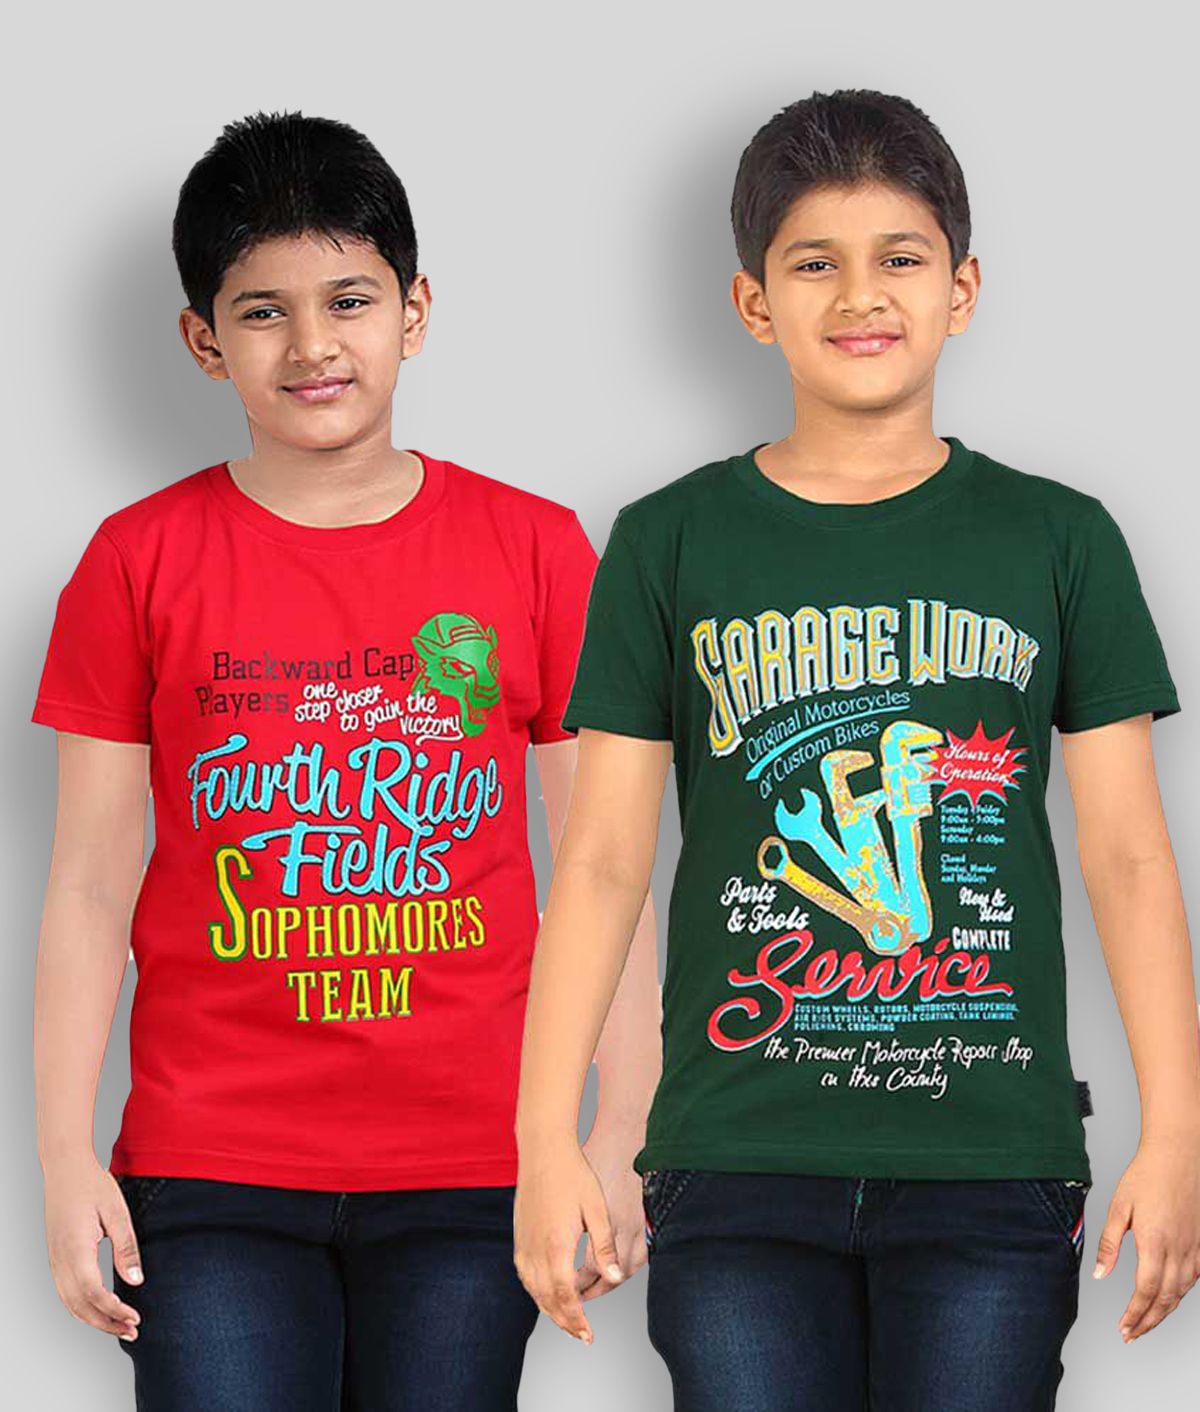 Dongli - Multicolor Cotton Boy's T-Shirt ( Pack of 2 )